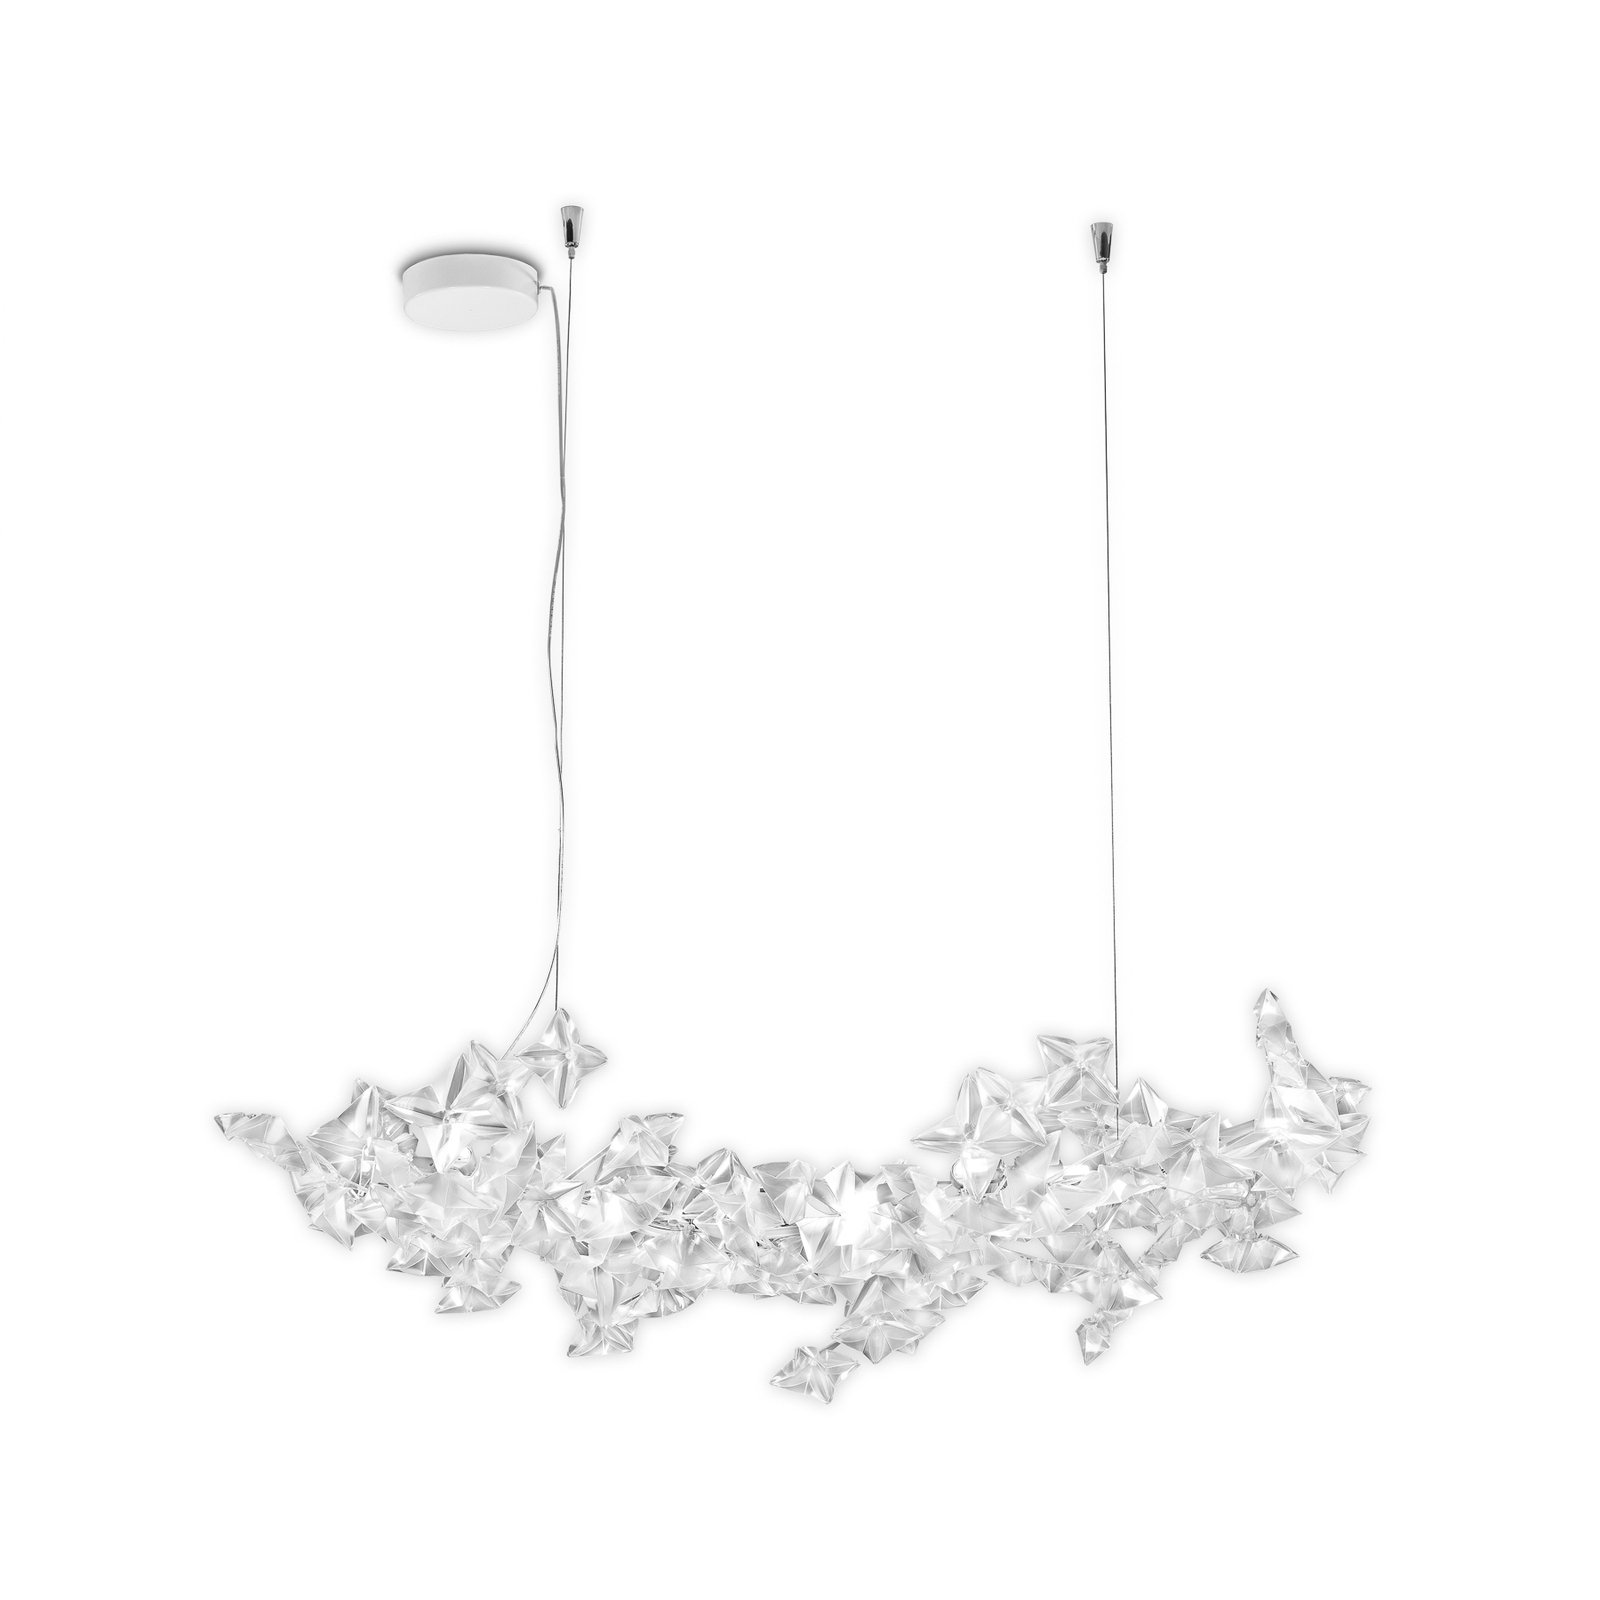 Slamp Hanami Suspension hanging light, clear cable